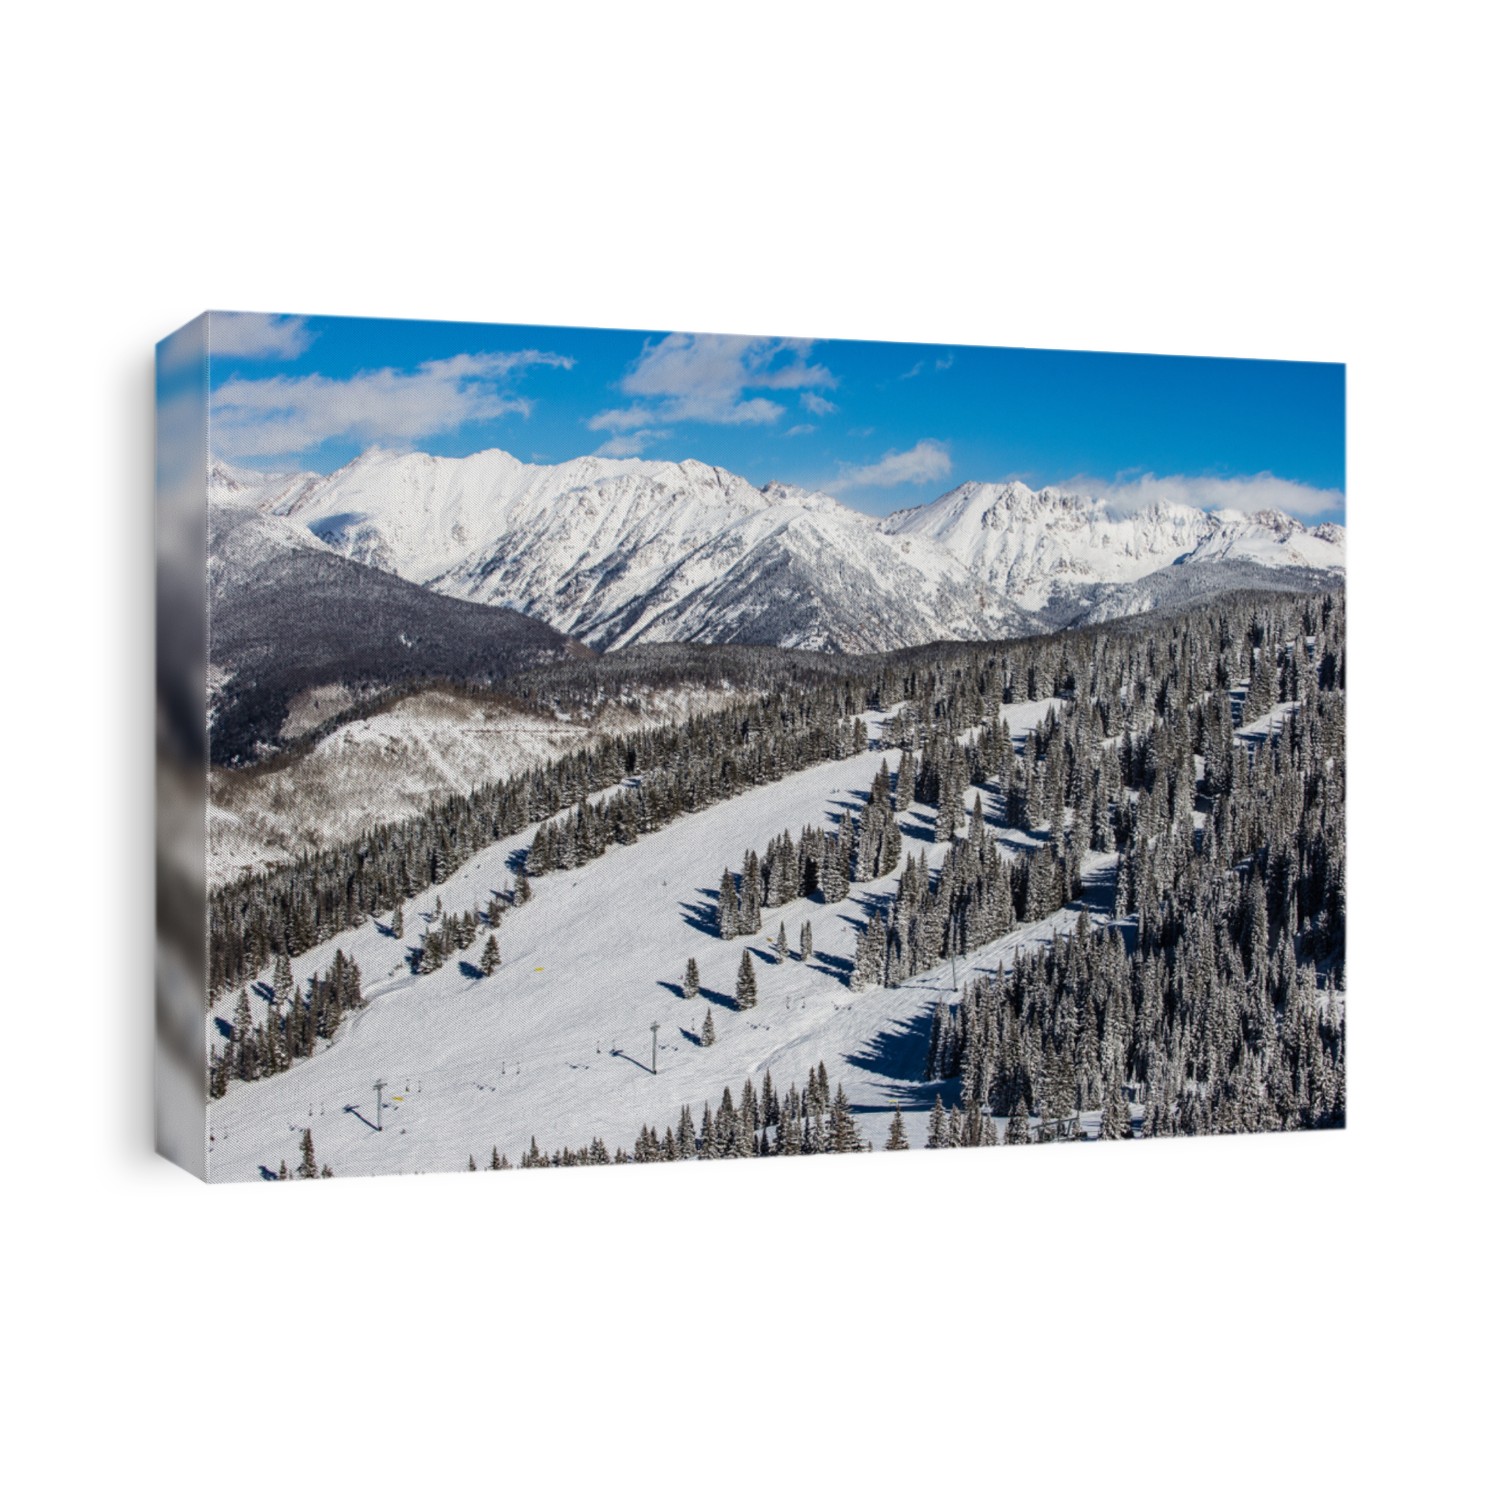 The famous Vail Mountain and the beautiful Gore Range mountains in the background, Colorado, USA